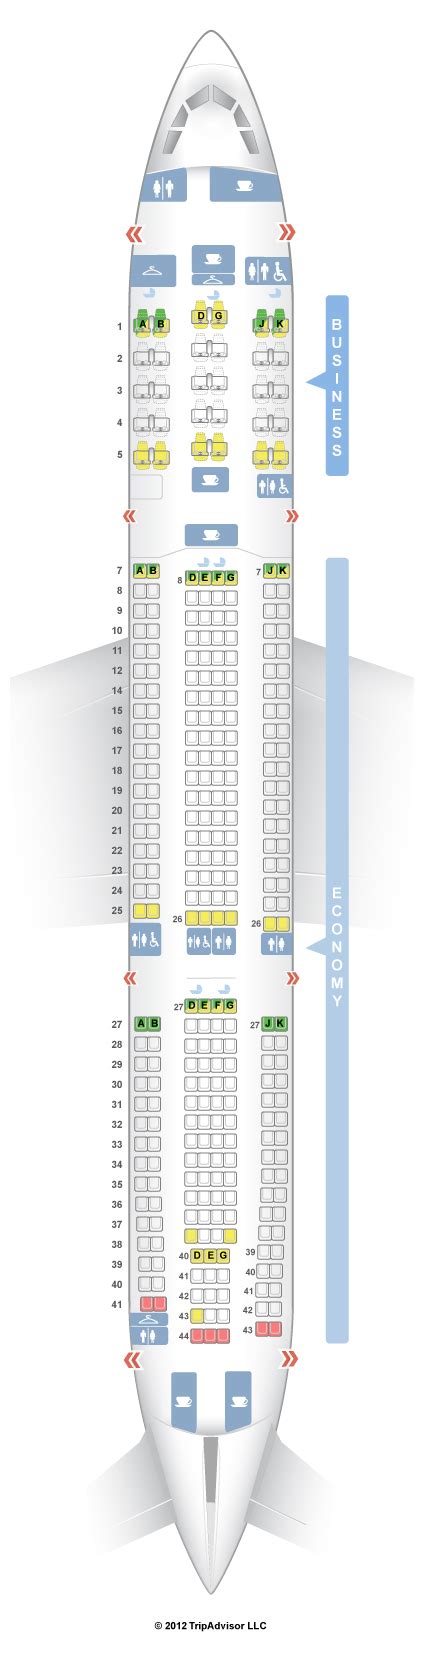 Airbus A330neo Seat Map Image To U